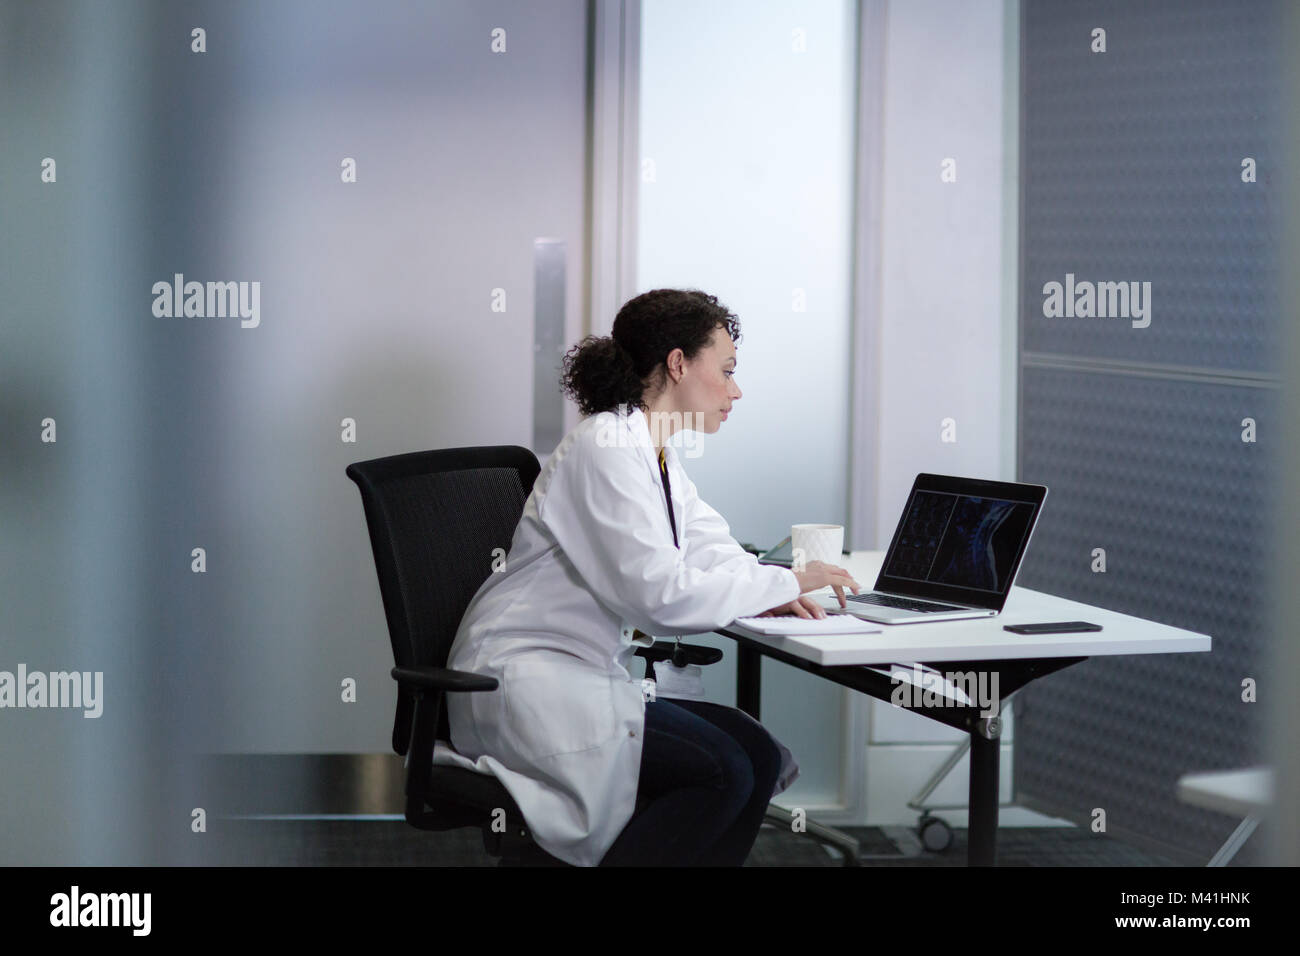 Female Medical Doctor looking at xray results on laptop Stock Photo